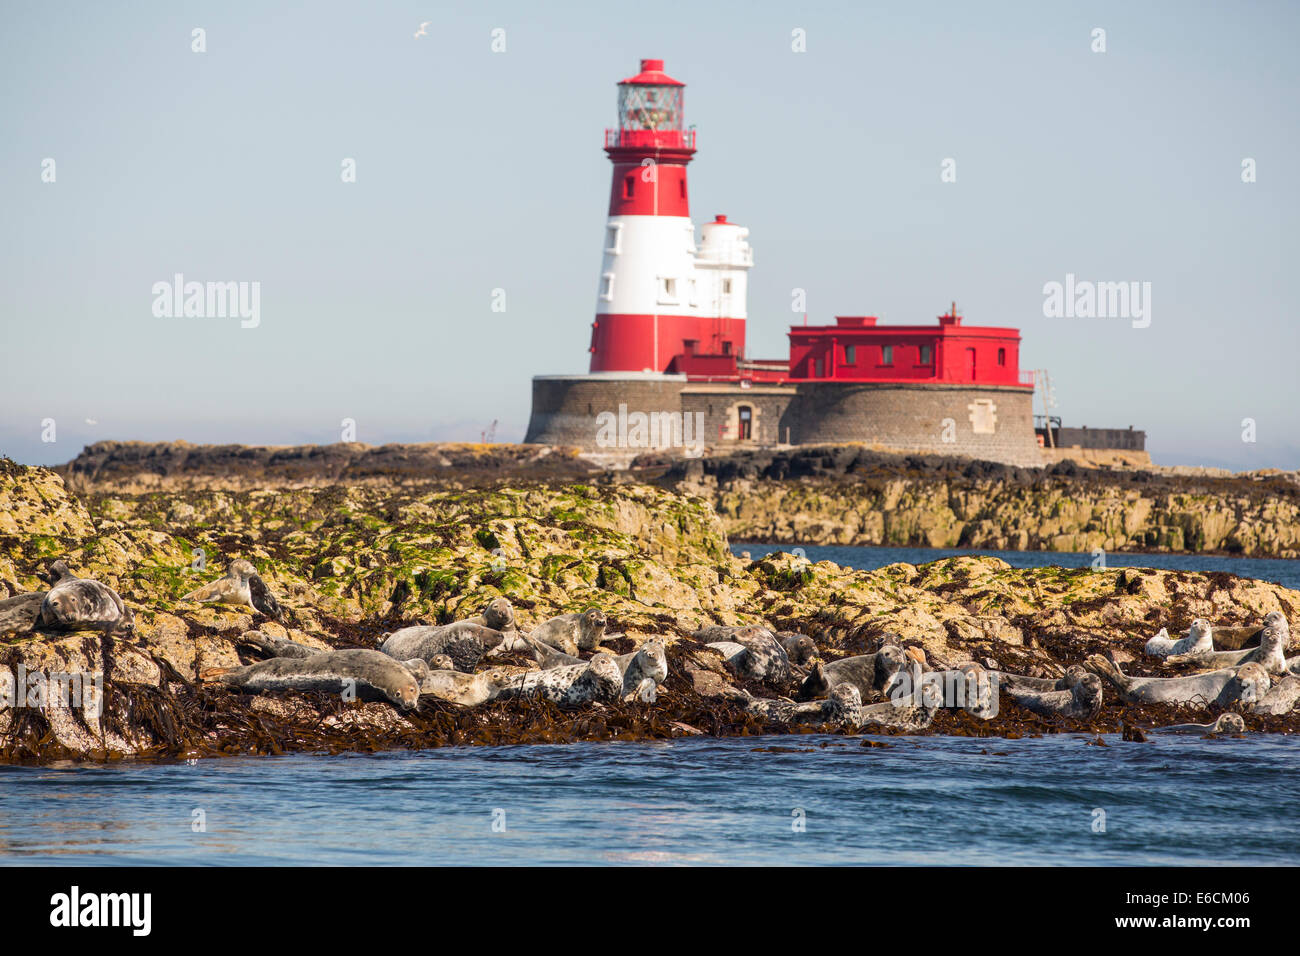 Common Seals, Phoca vitulina, on the Farne Islands, Northumberland, UK, with the Longstone lighthouse that Grace Darling performed her famous rescue from. Stock Photo